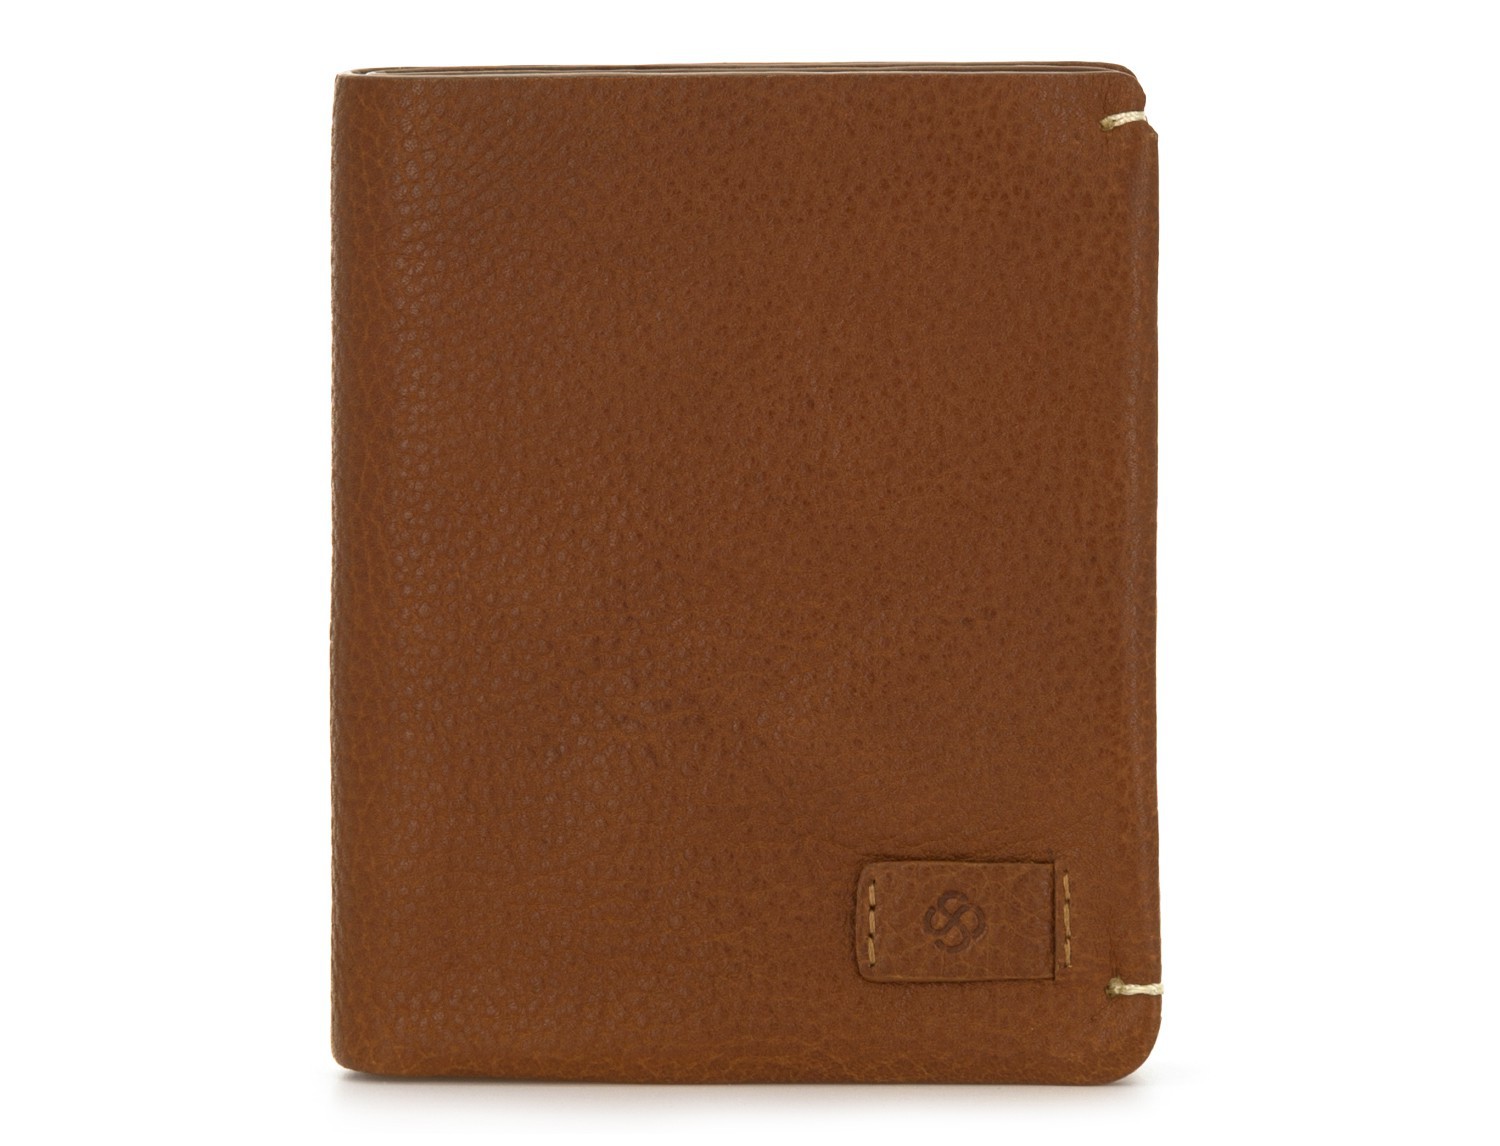 Small leather men wallet light brown front